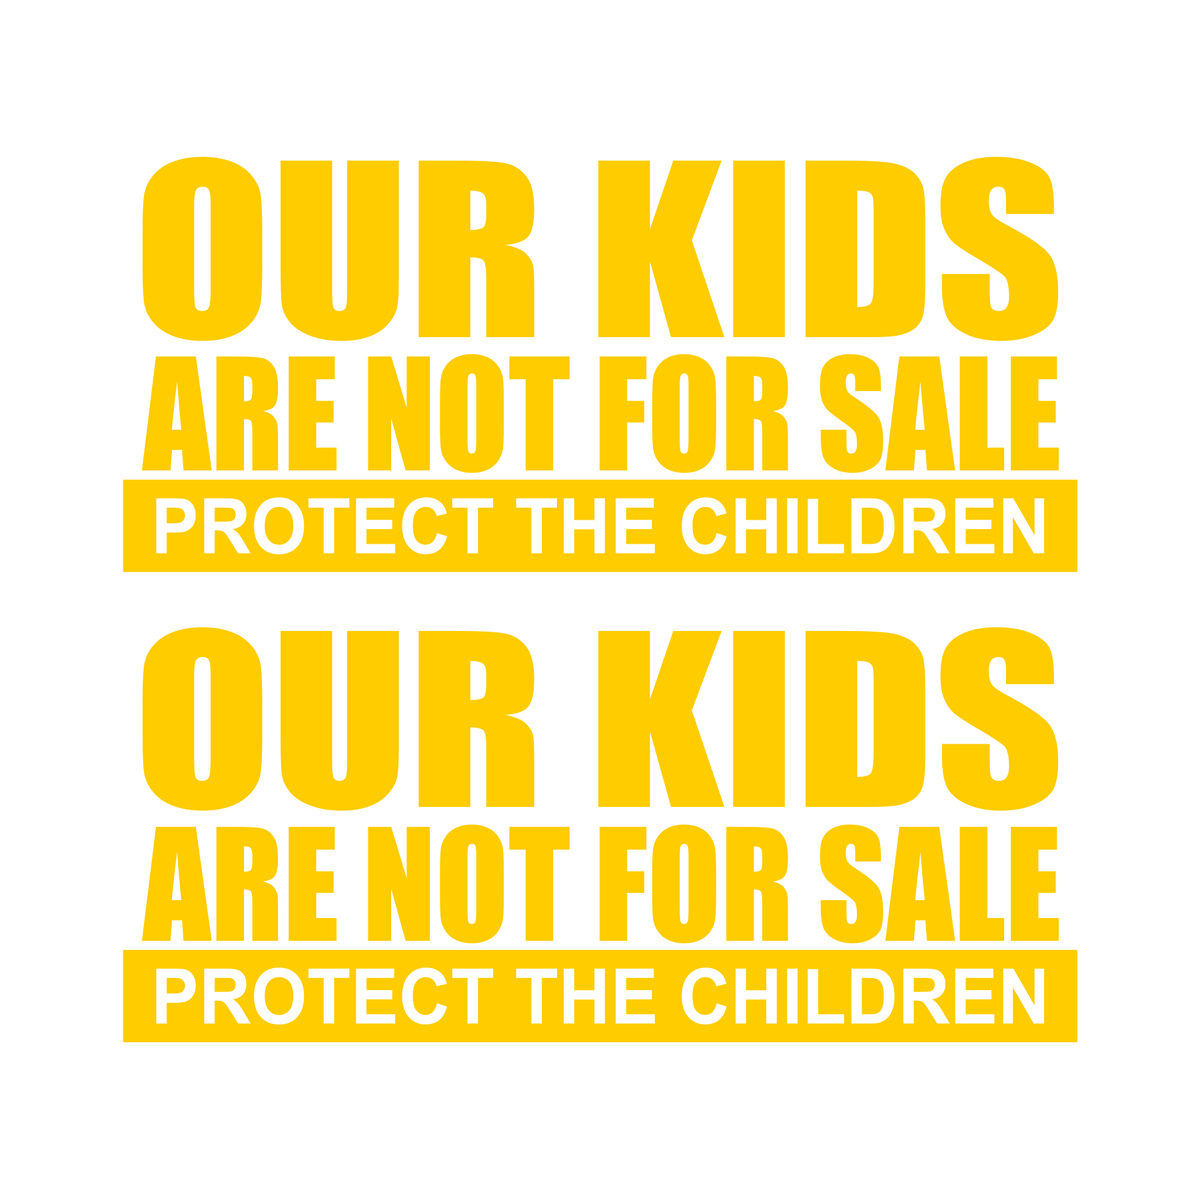 Pair of 2 - Our Kids Are Not For Sale - Protect the Children - Vinyl Decals - Free Shipping